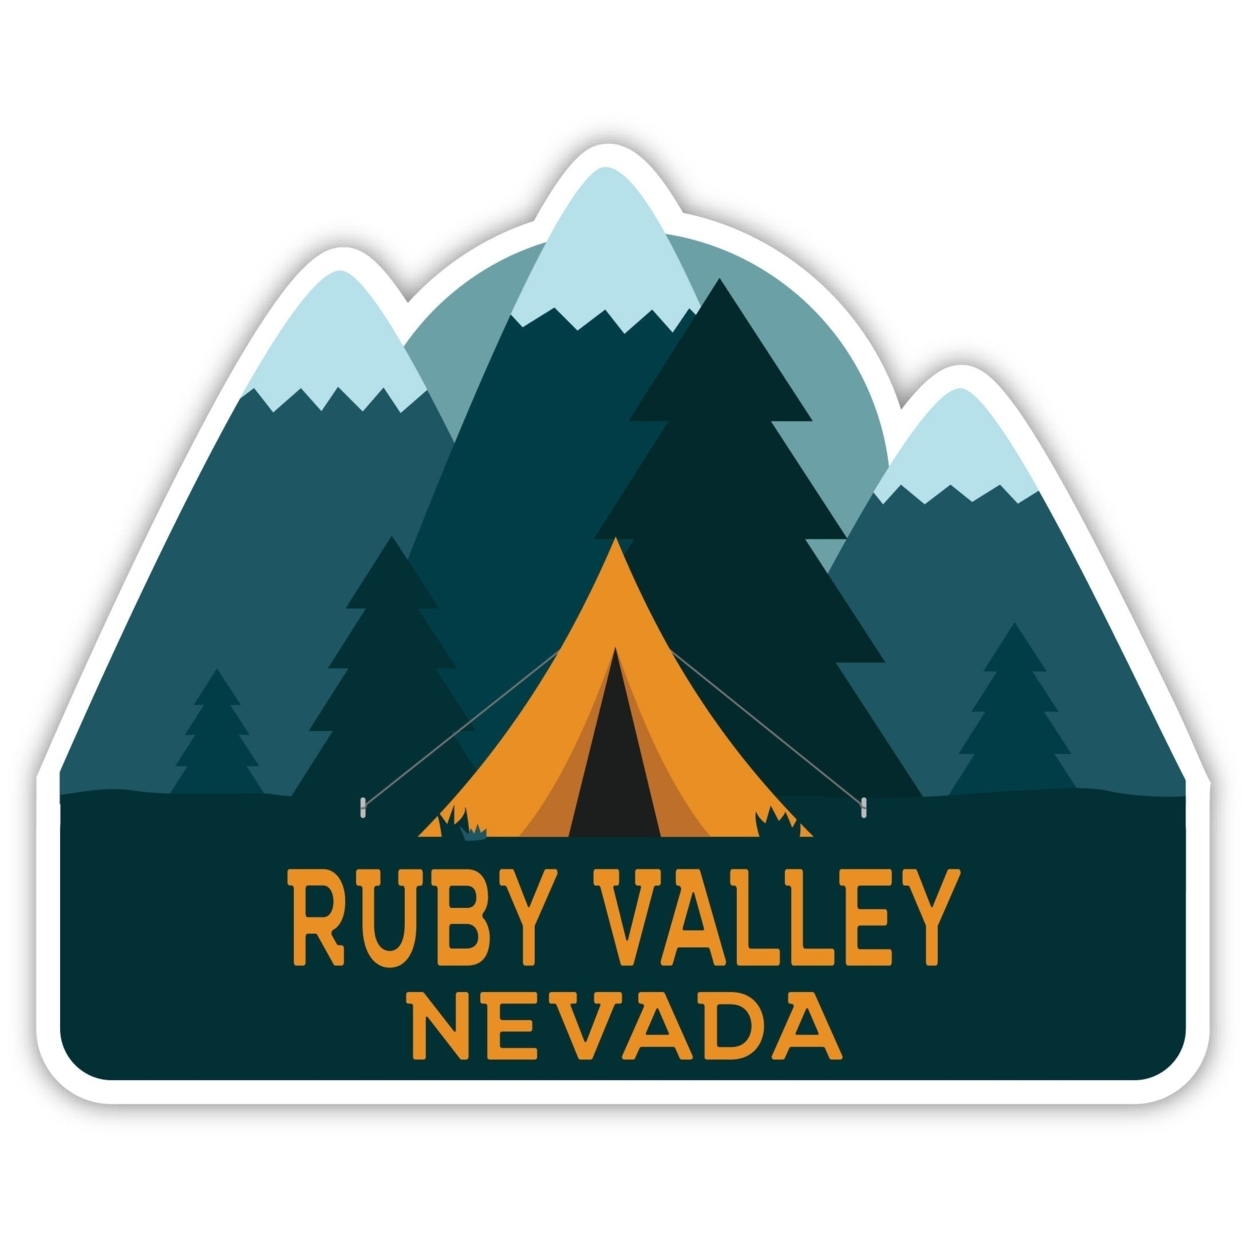 Ruby Valley Nevada Souvenir Decorative Stickers (Choose Theme And Size) - Single Unit, 2-Inch, Tent